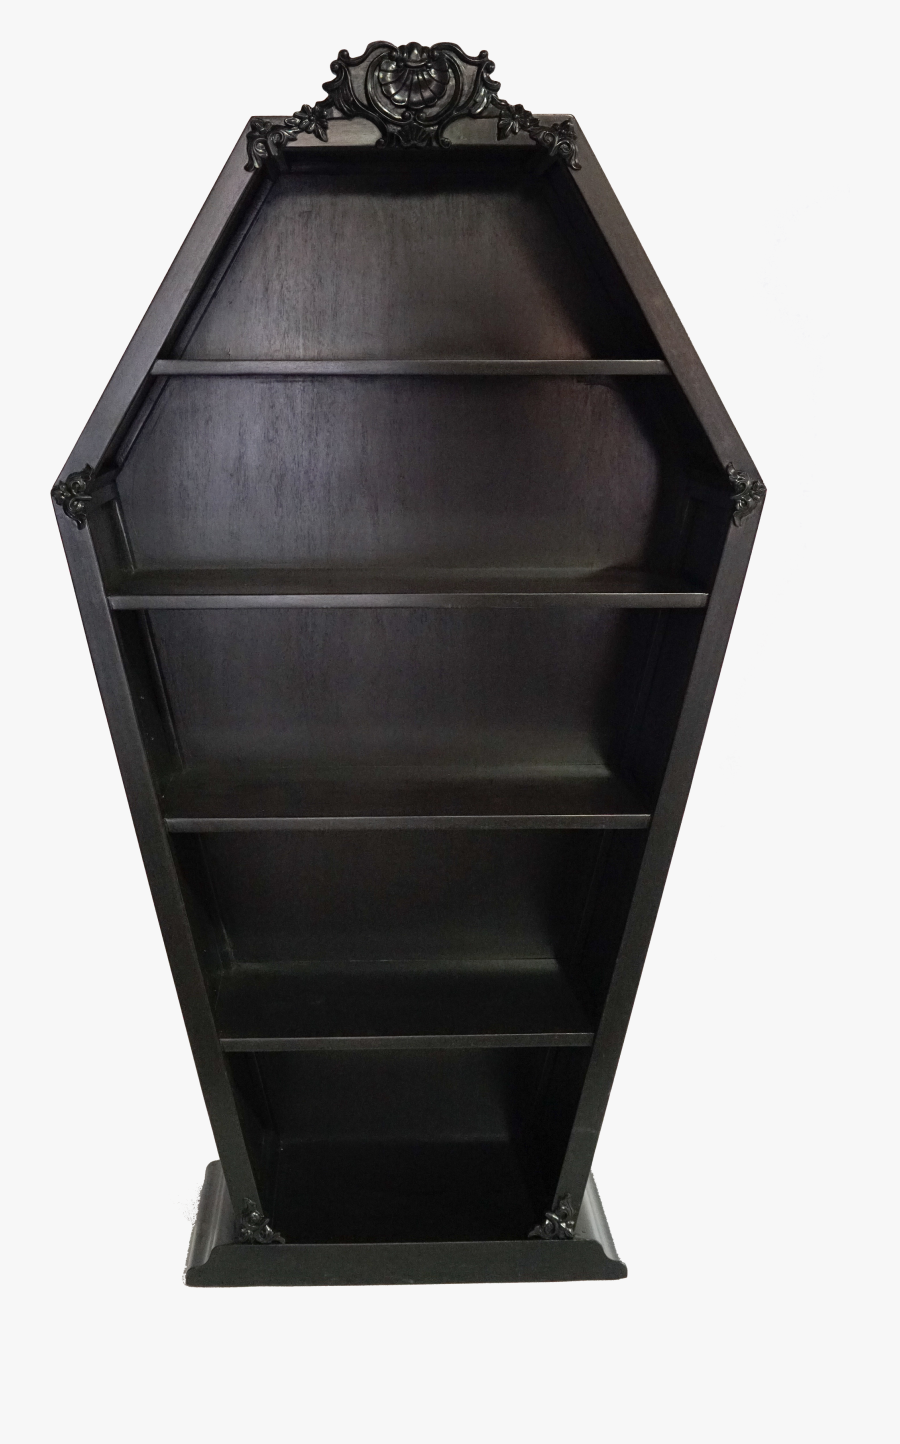 Picture Of Coffin - Shelf, Transparent Clipart